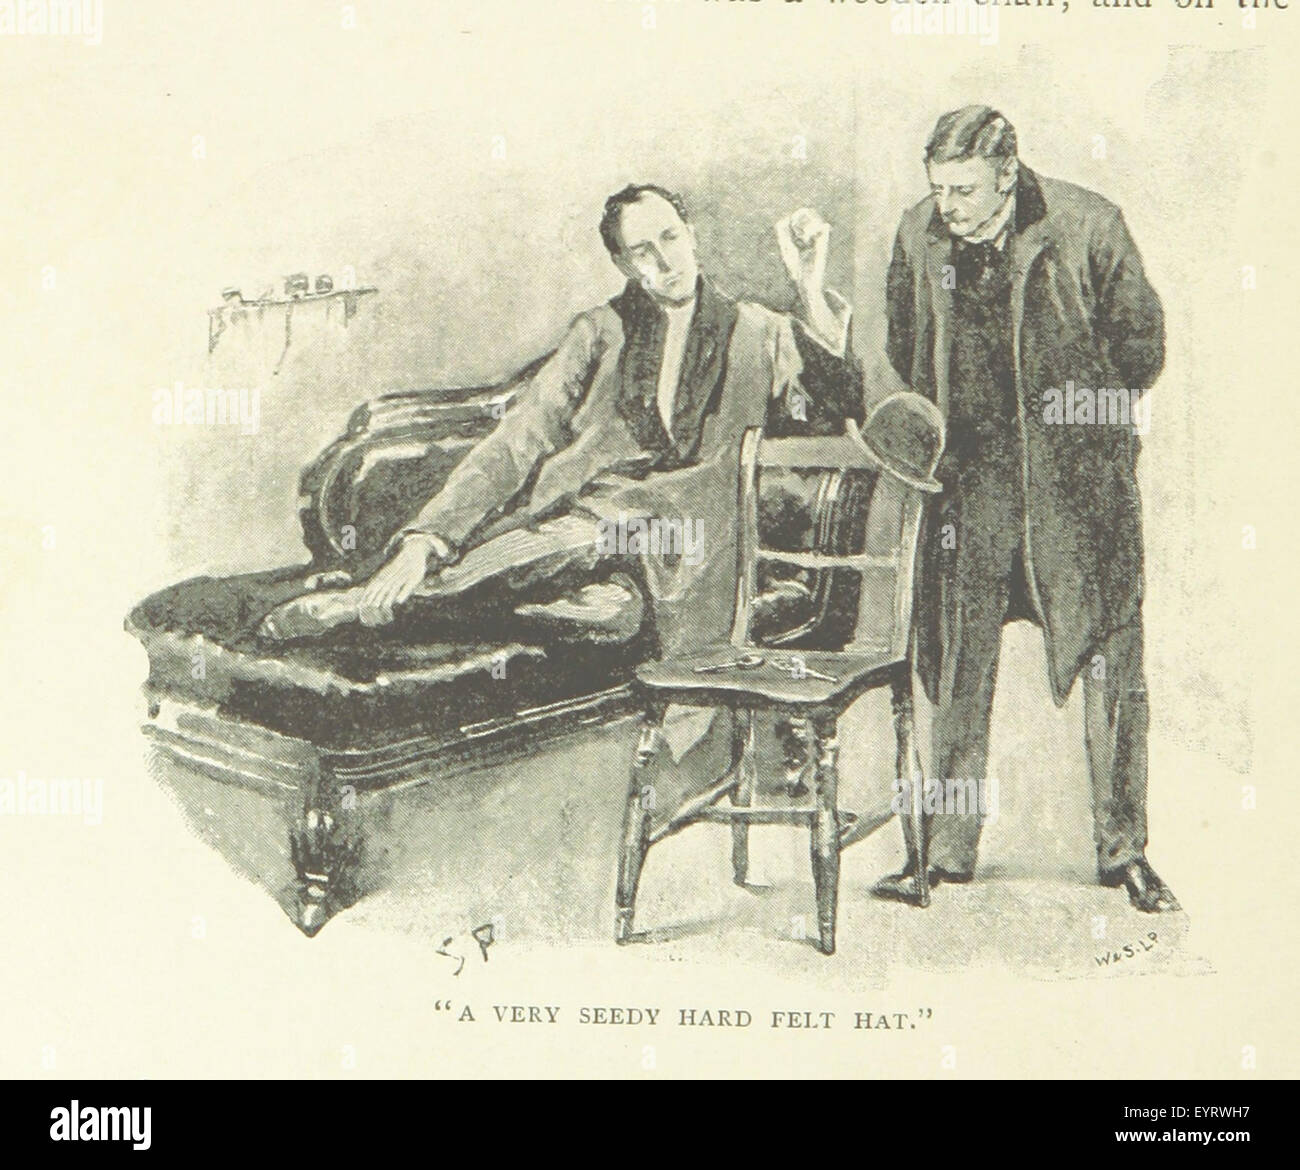 Image taken from page 166 of 'The Adventures of Sherlock Holmes' Image taken from page 166 of 'The Adventures of Sherlock Stock Photo